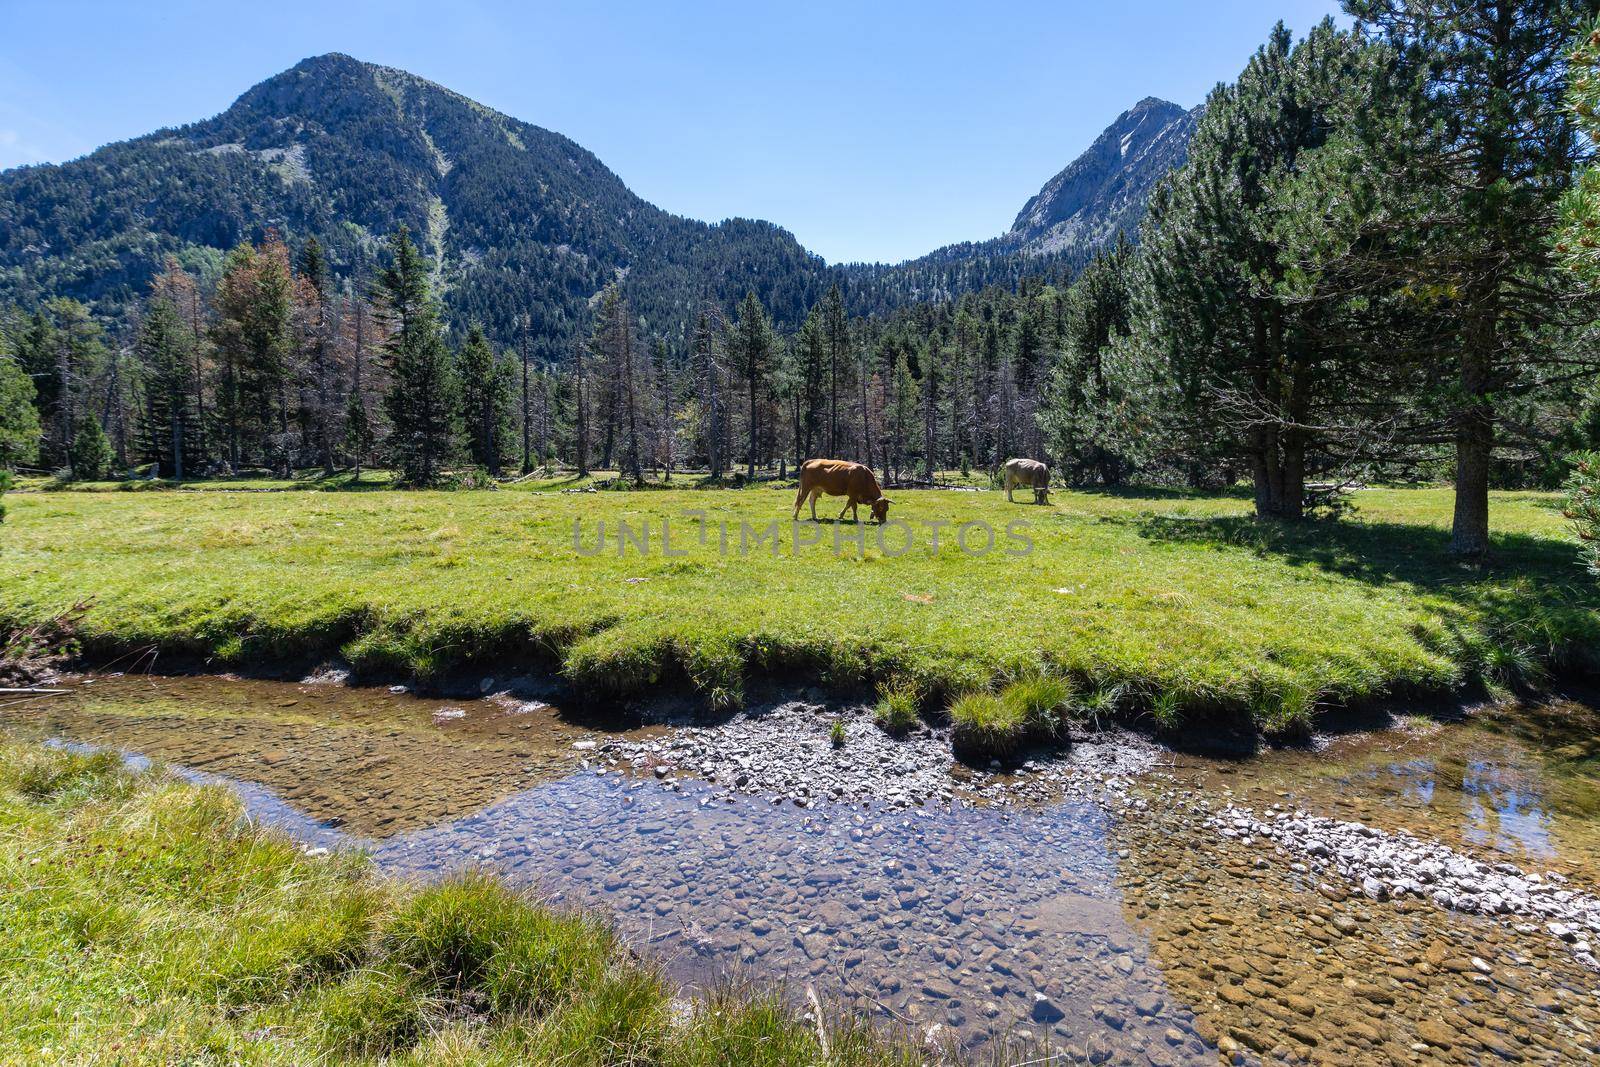 Famous Aiguestortes i Estany de Sant Maurici National Park of the Spanish Pyrenees mountain in Catalonia, cows on the mountain pasture